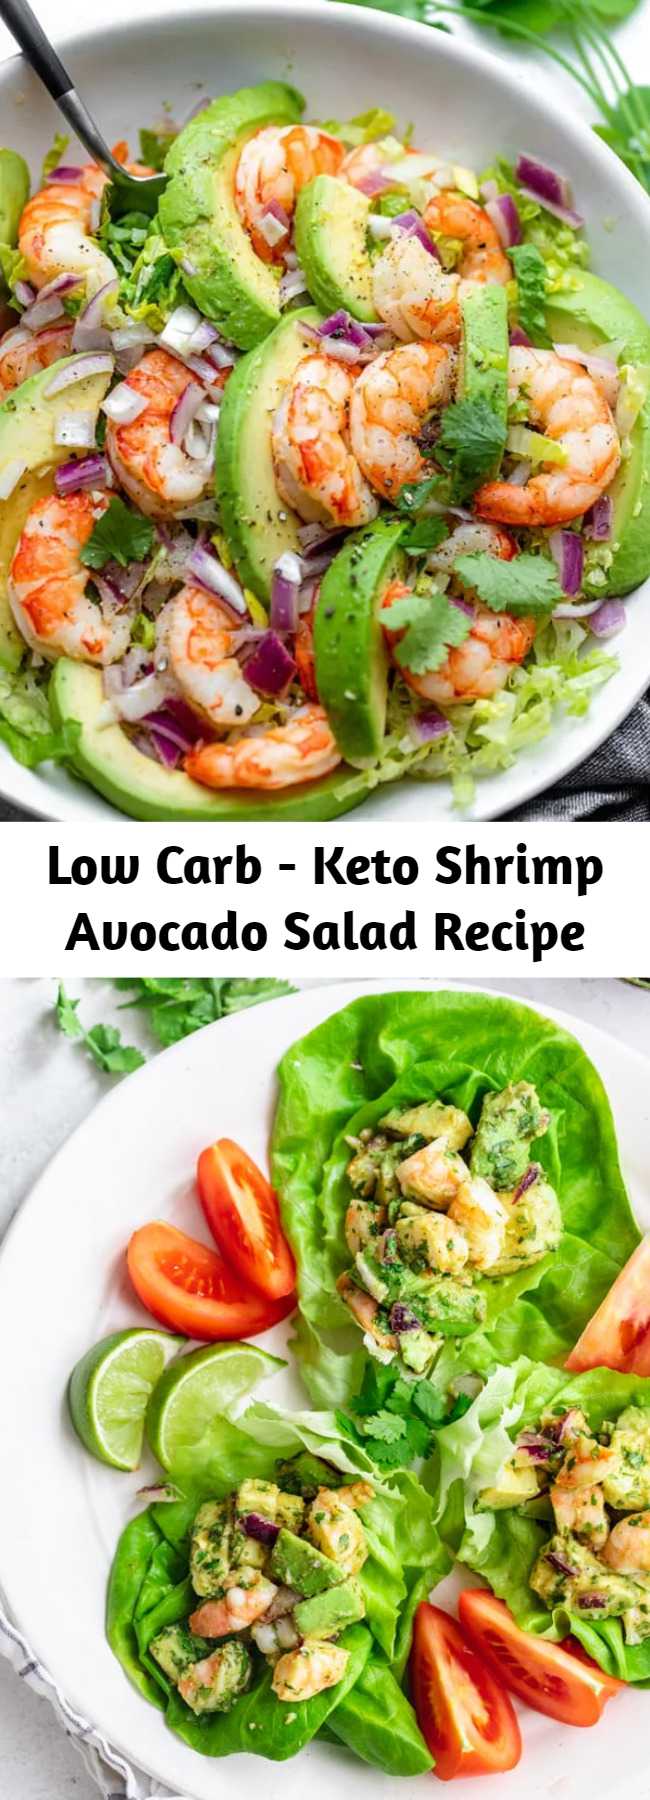 Low Carb - Keto Shrimp Avocado Salad Recipe - This light and simple Shrimp Avocado Salad uses only a few simple ingredients with a zesty lime olive oil dressing that adds a burst of fresh flavor! Try it for a healthy, low carb lunch! #shrimp #avocado #salad #healthy #lunch #feelgoodfoodie